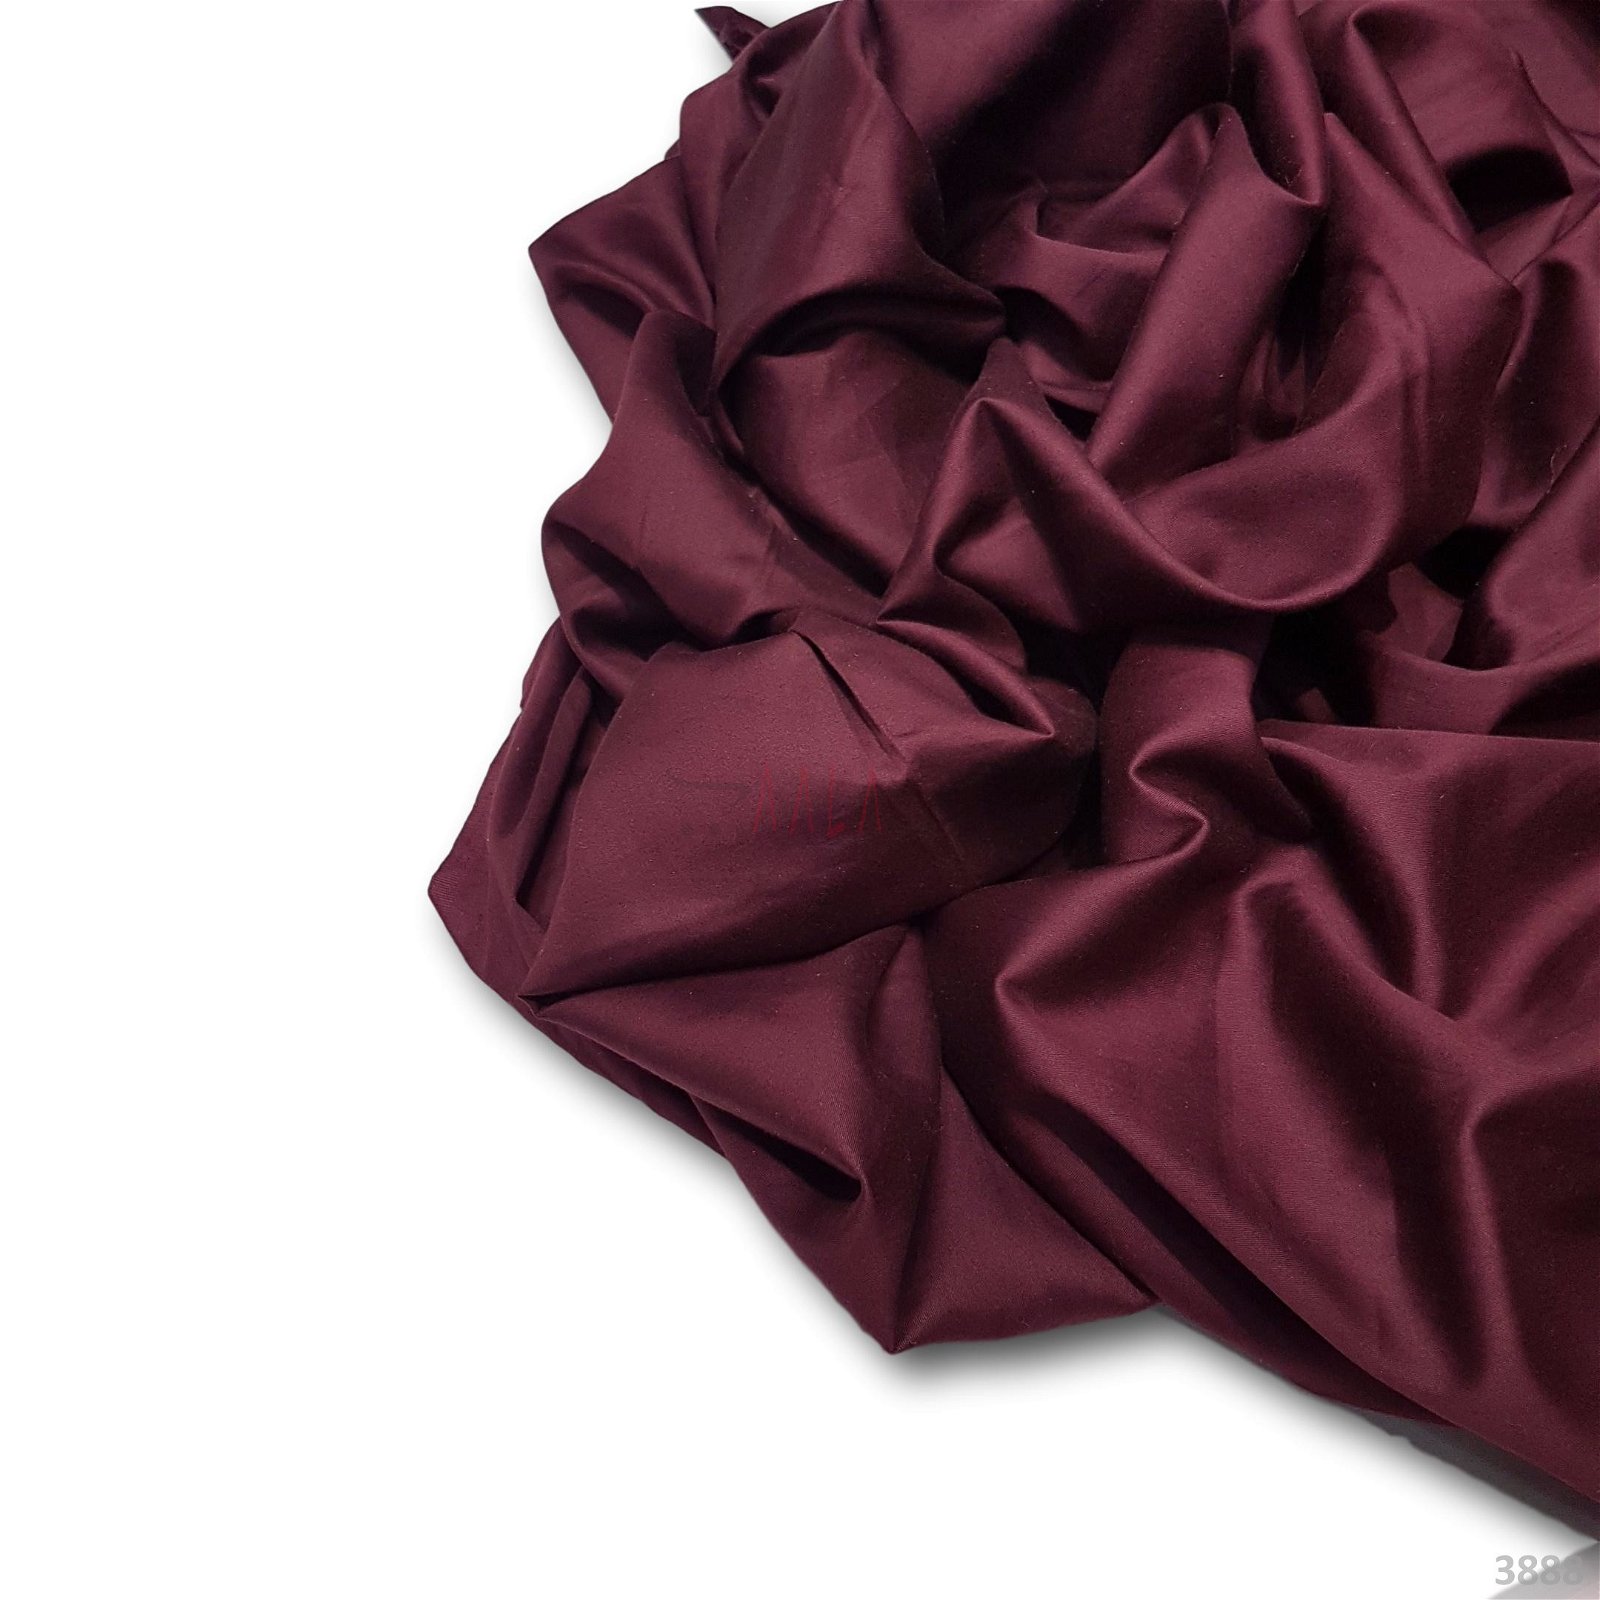 Satin Cotton 44 Inches Dyed Per Metre #3888